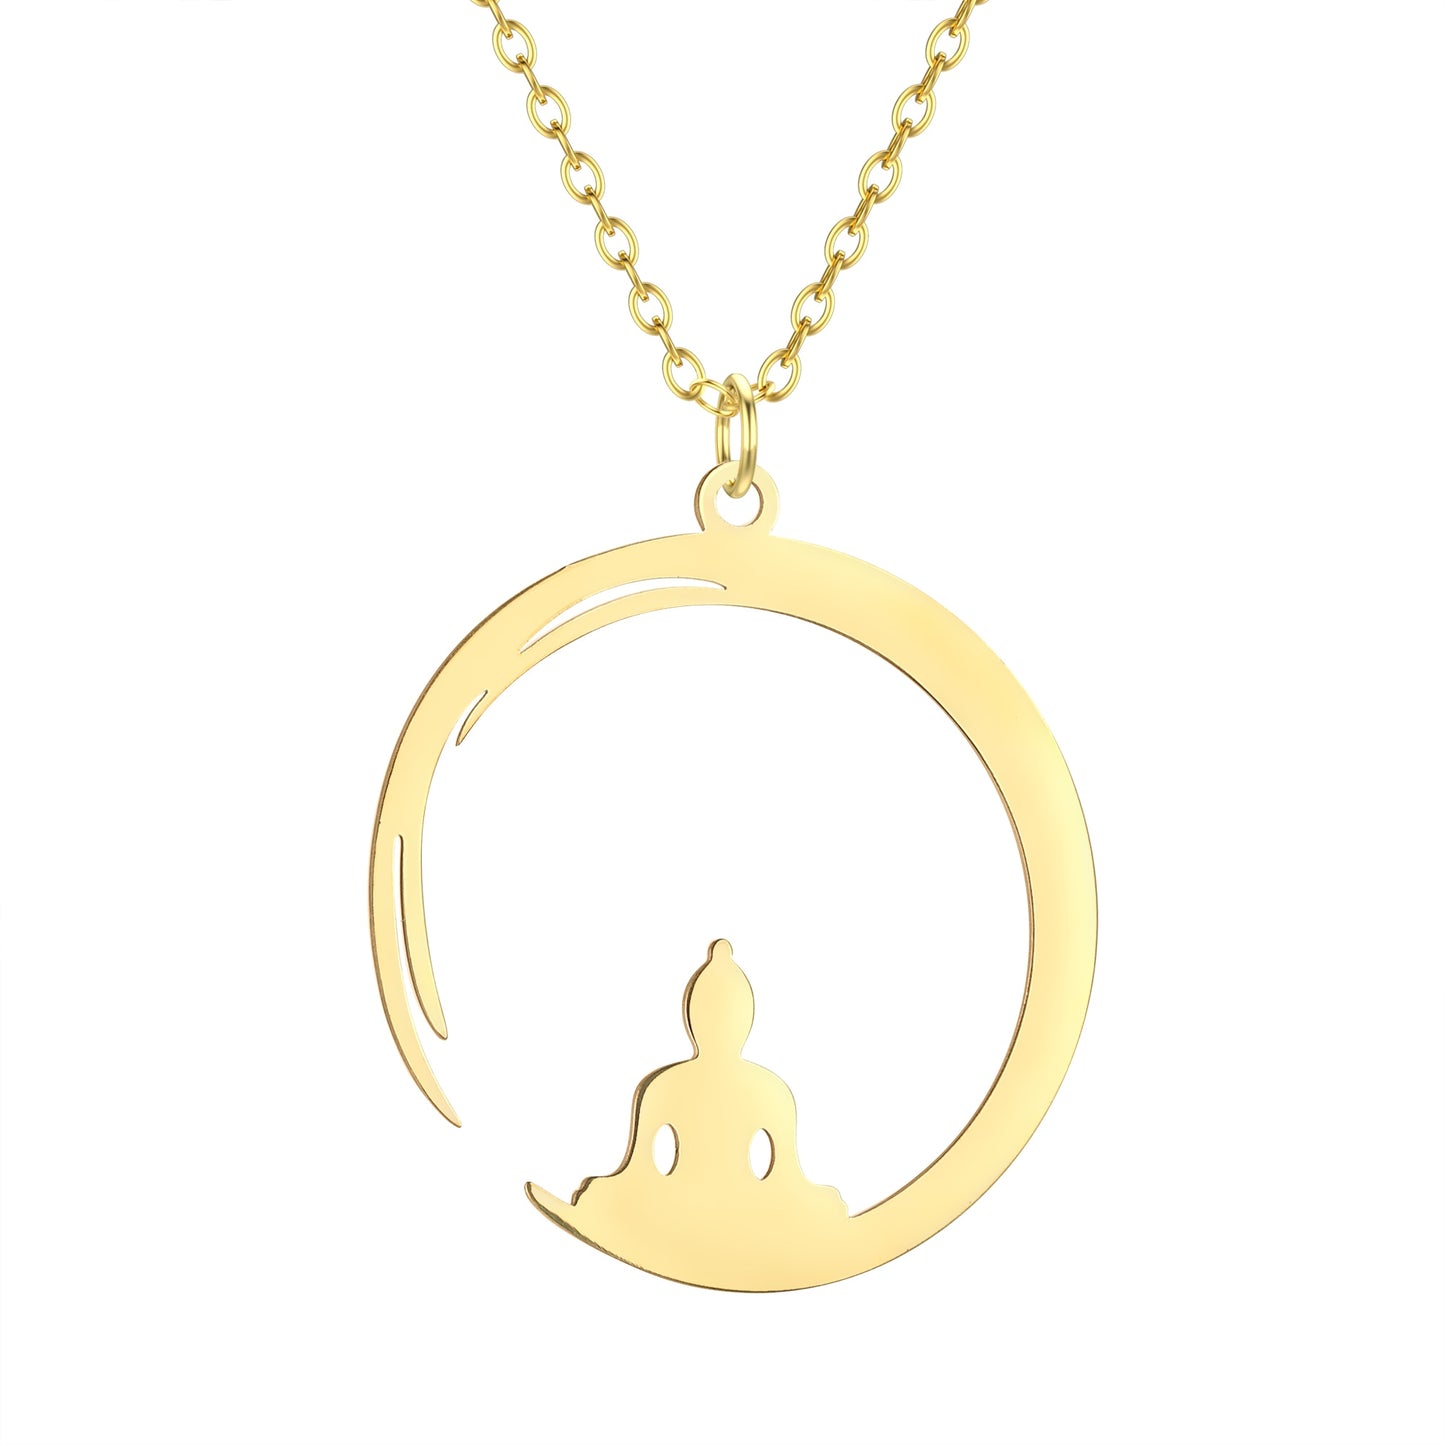 Todorova Stainless Steel Round Buddhism Meditation Pendent Buddha Yoga Necklace For Women Men Amulet Choker Jewelry Gifts